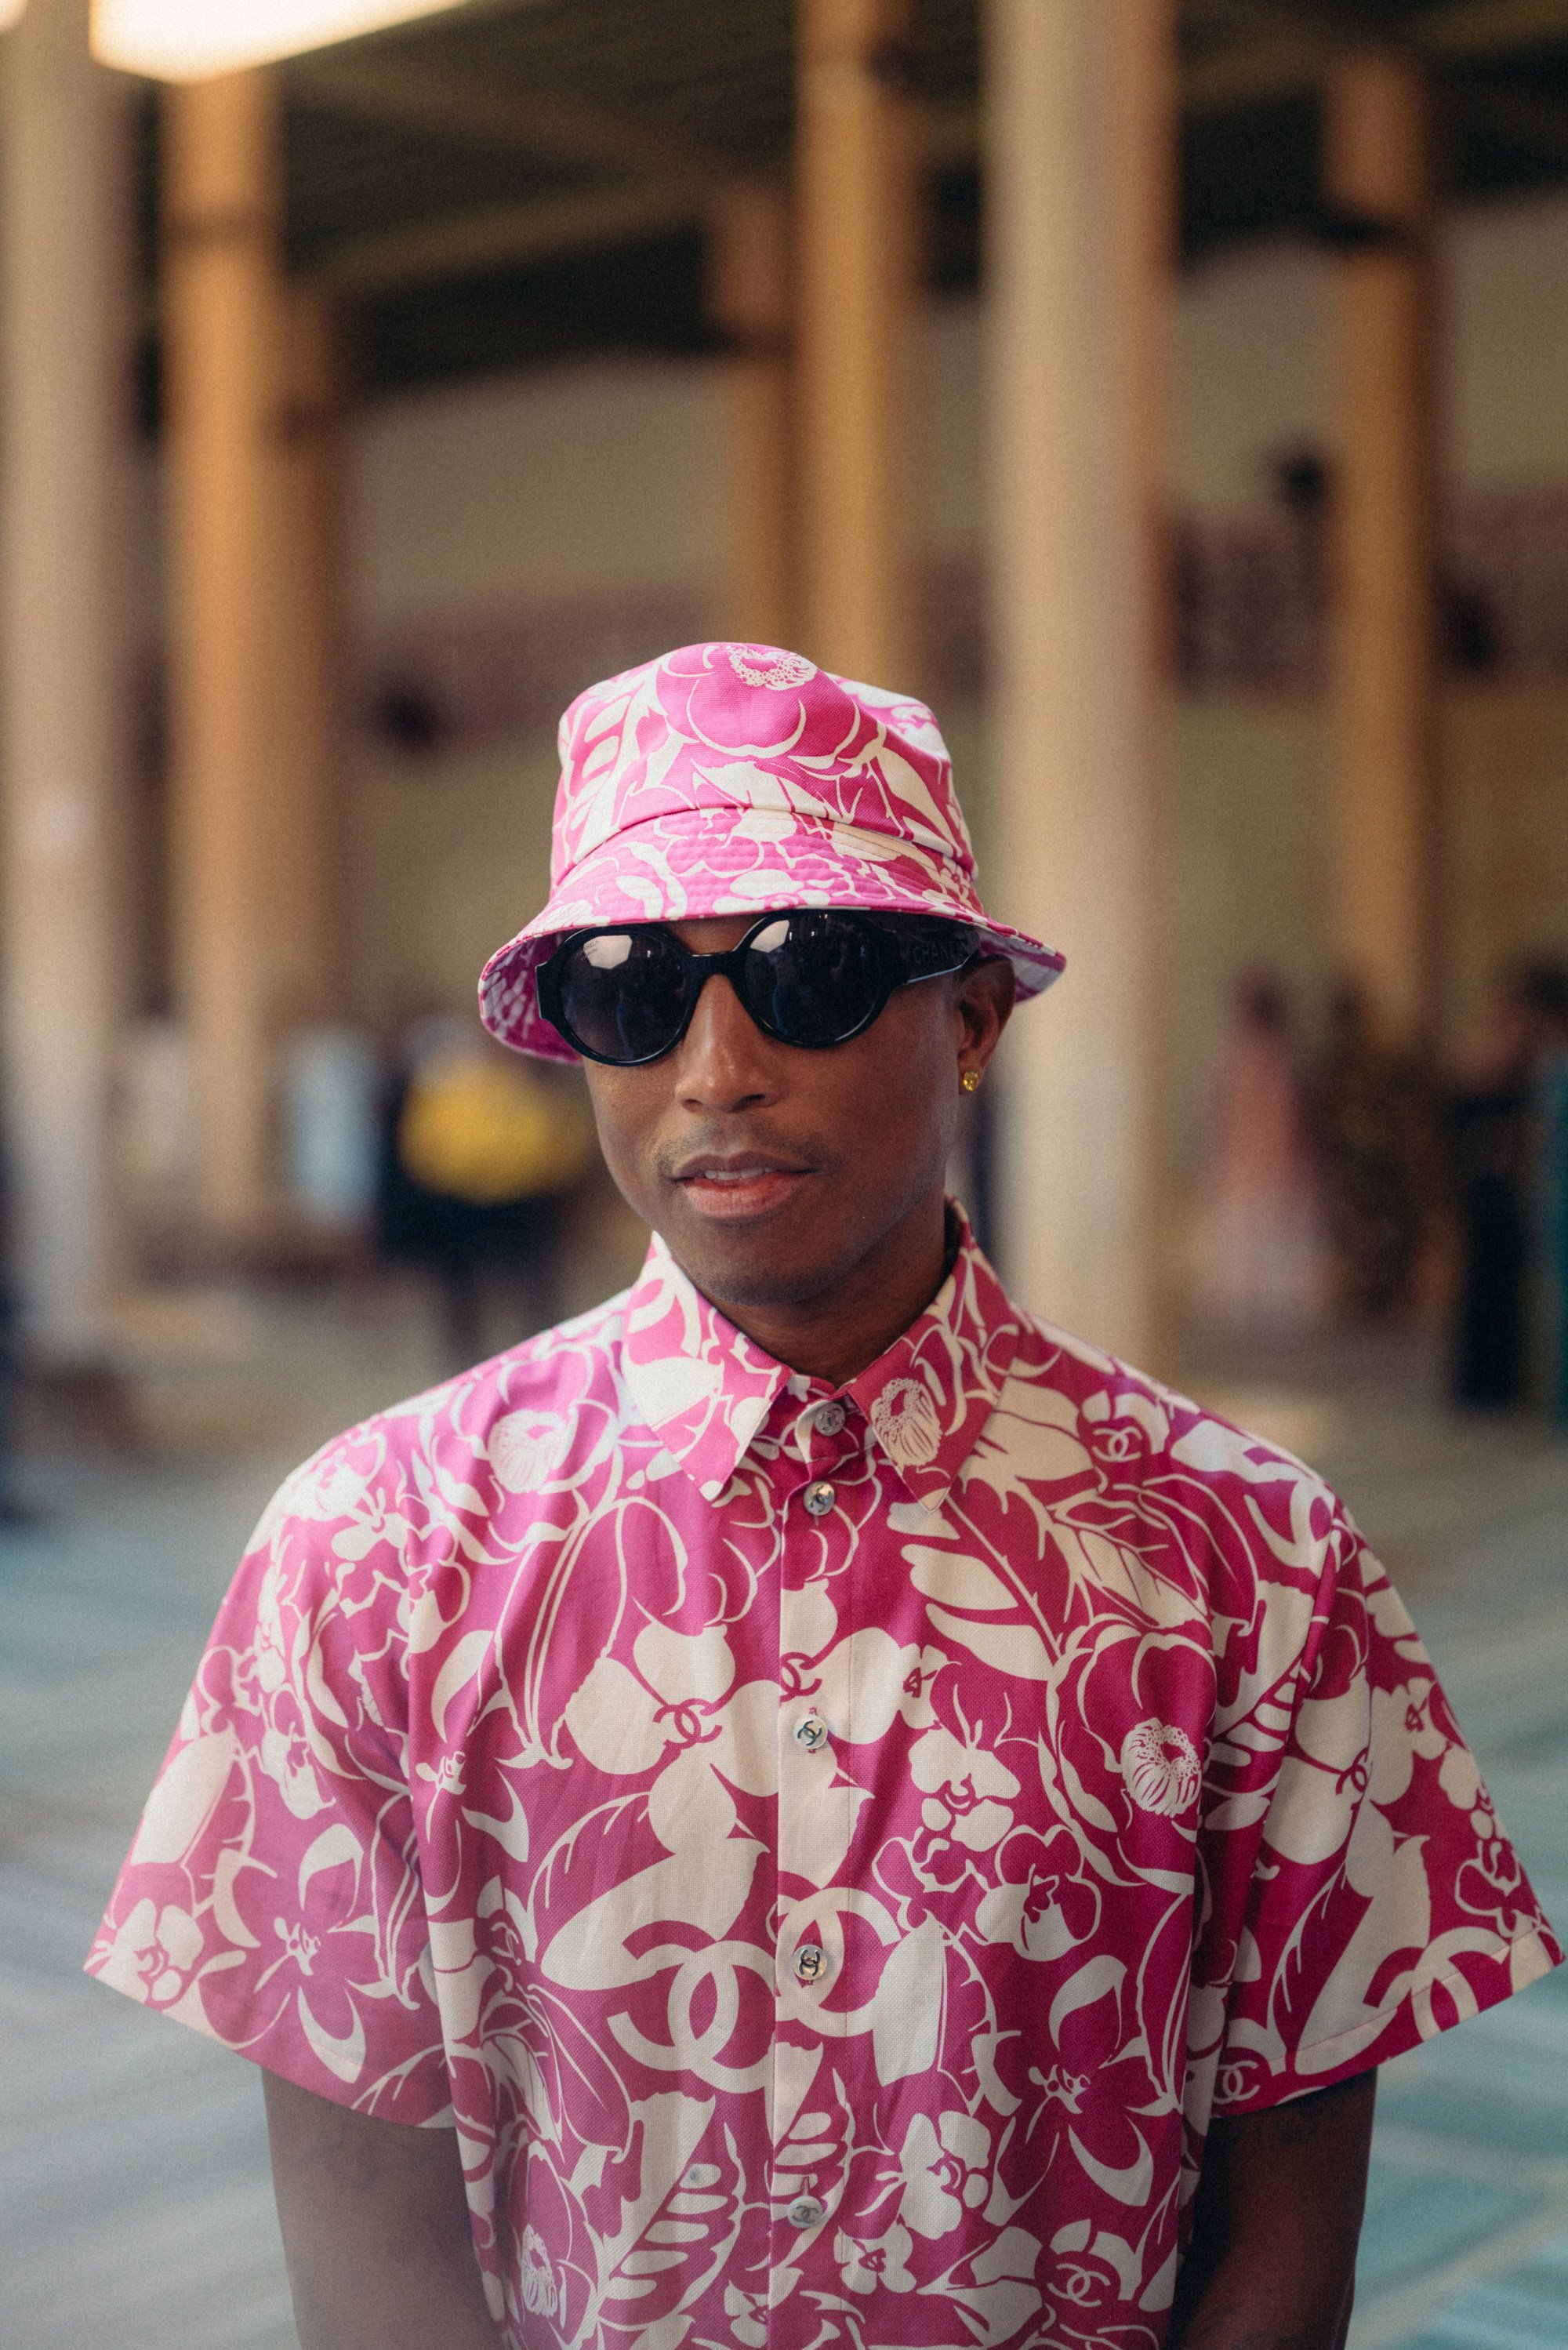 Pharrell Williams brings a long history of fashion collaborations